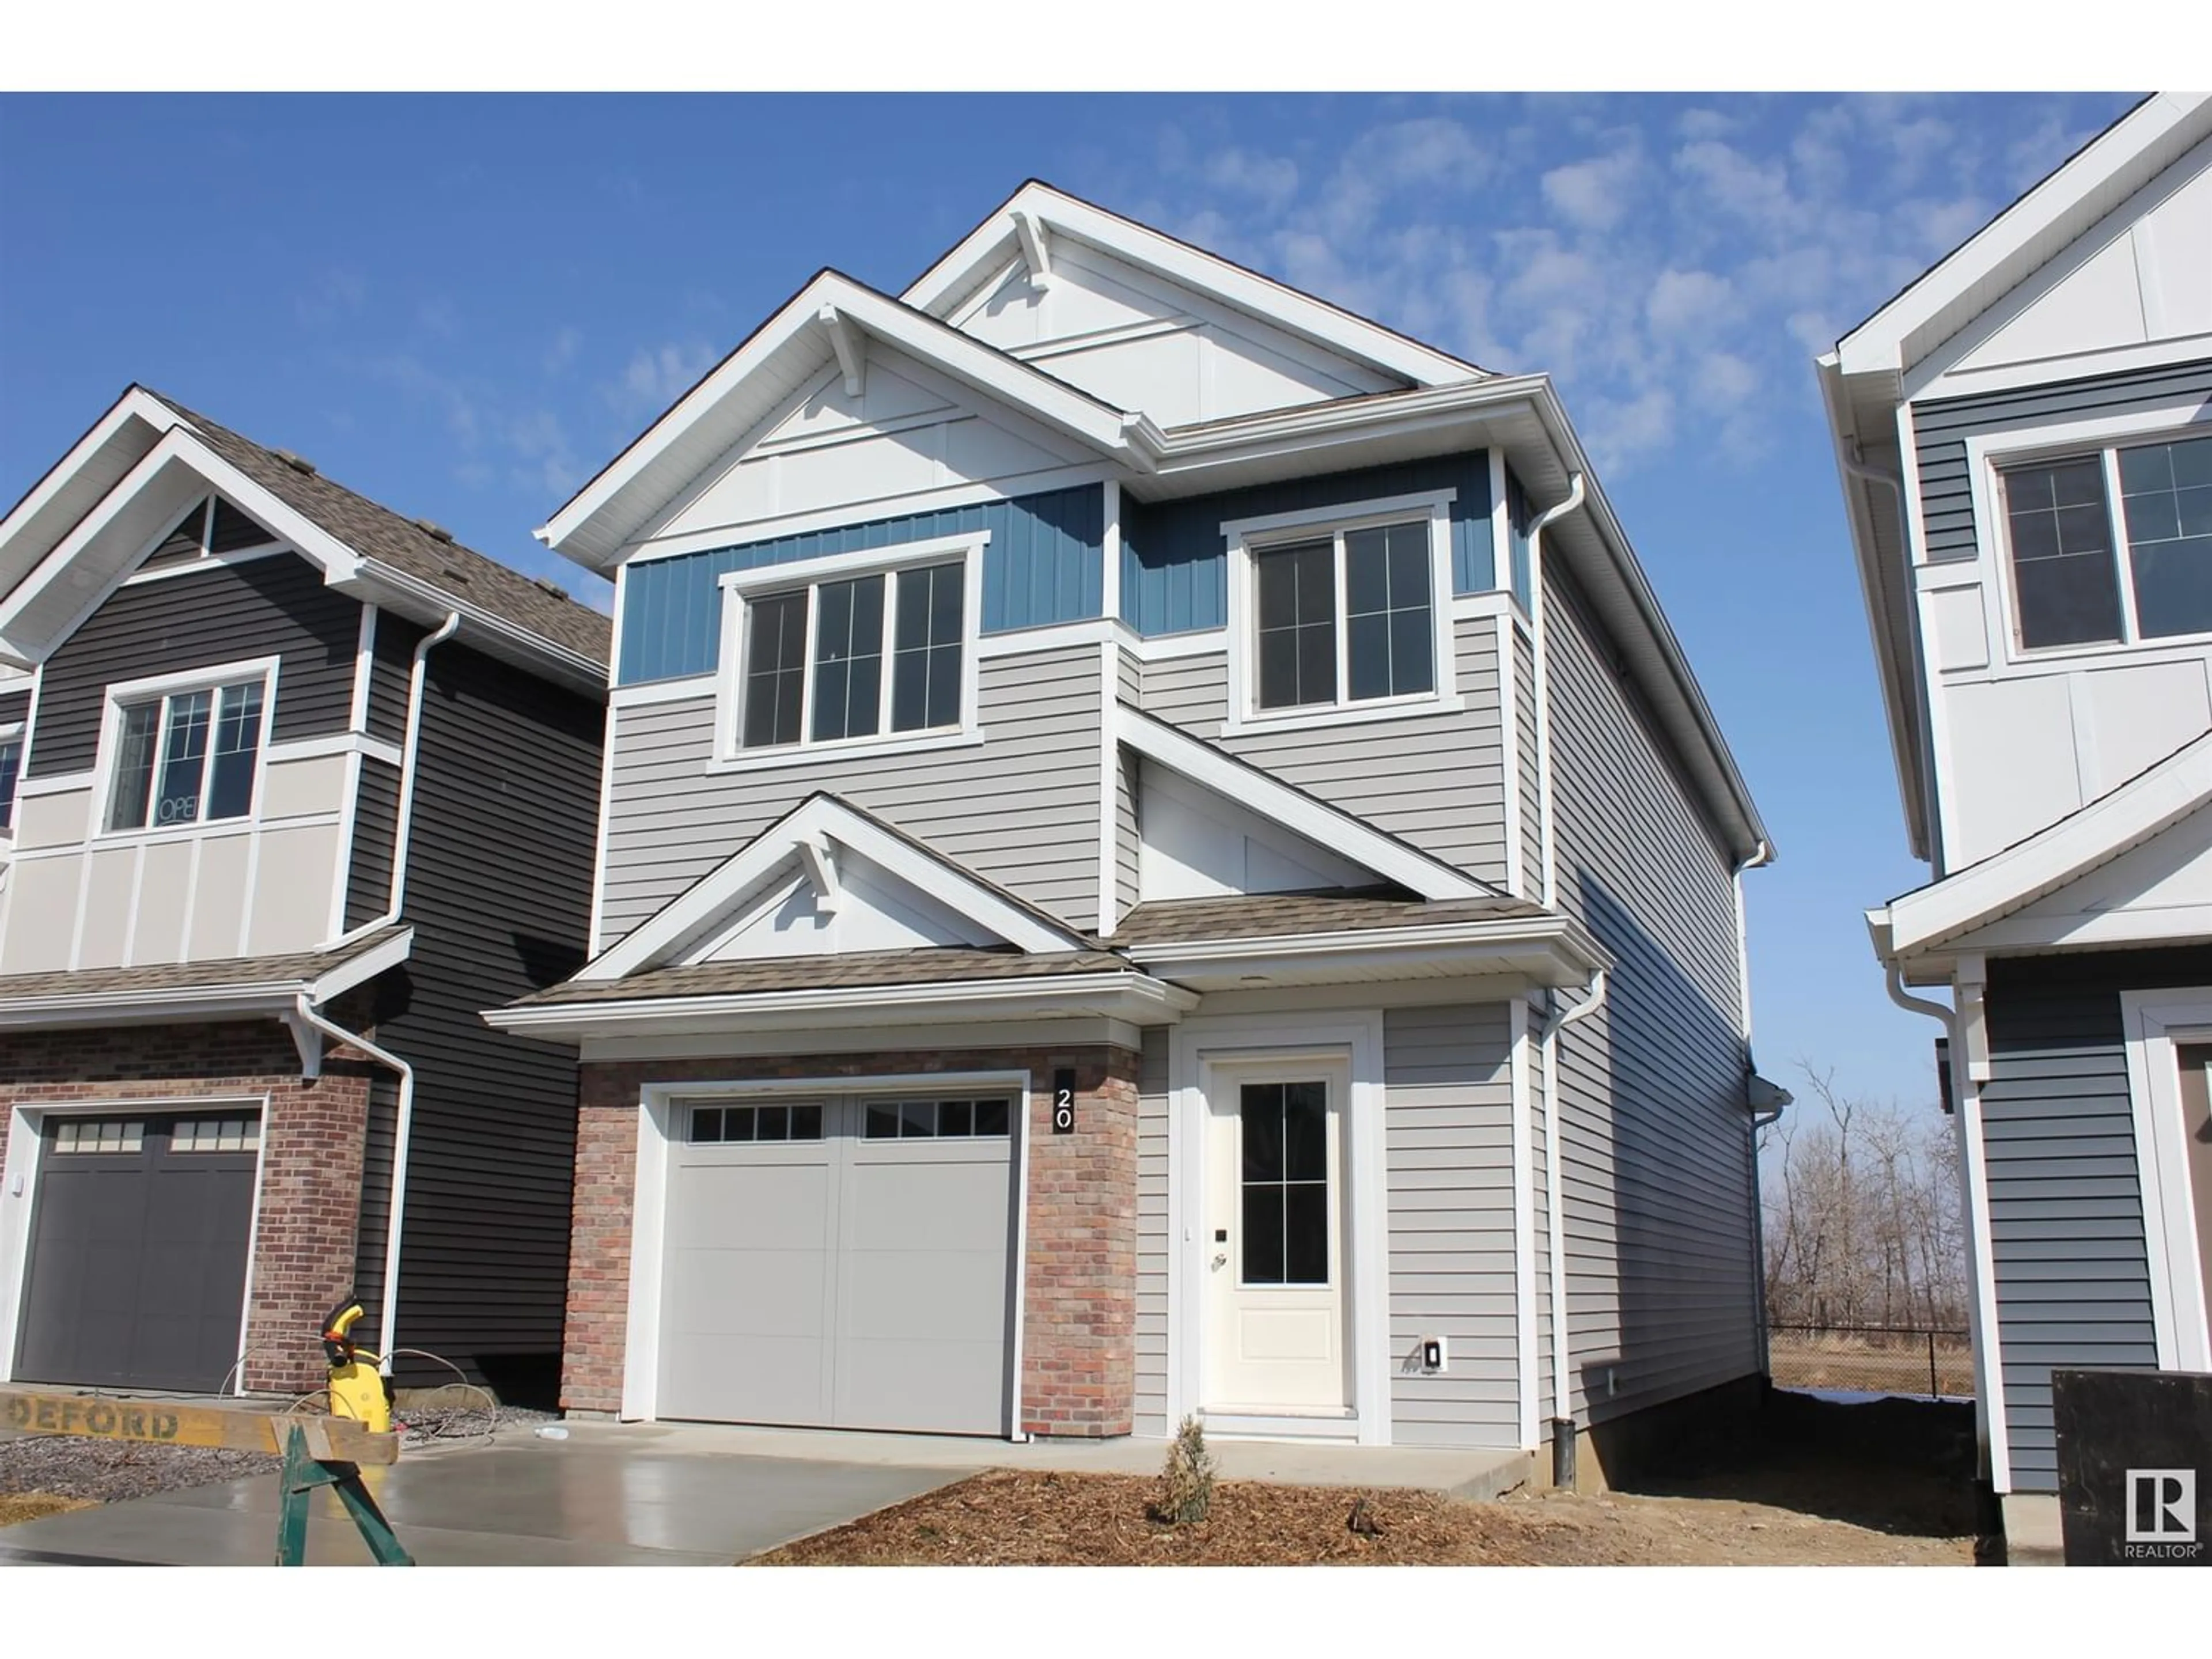 A pic from exterior of the house or condo for #42 19904 31 AV NW, Edmonton Alberta T6M1N7